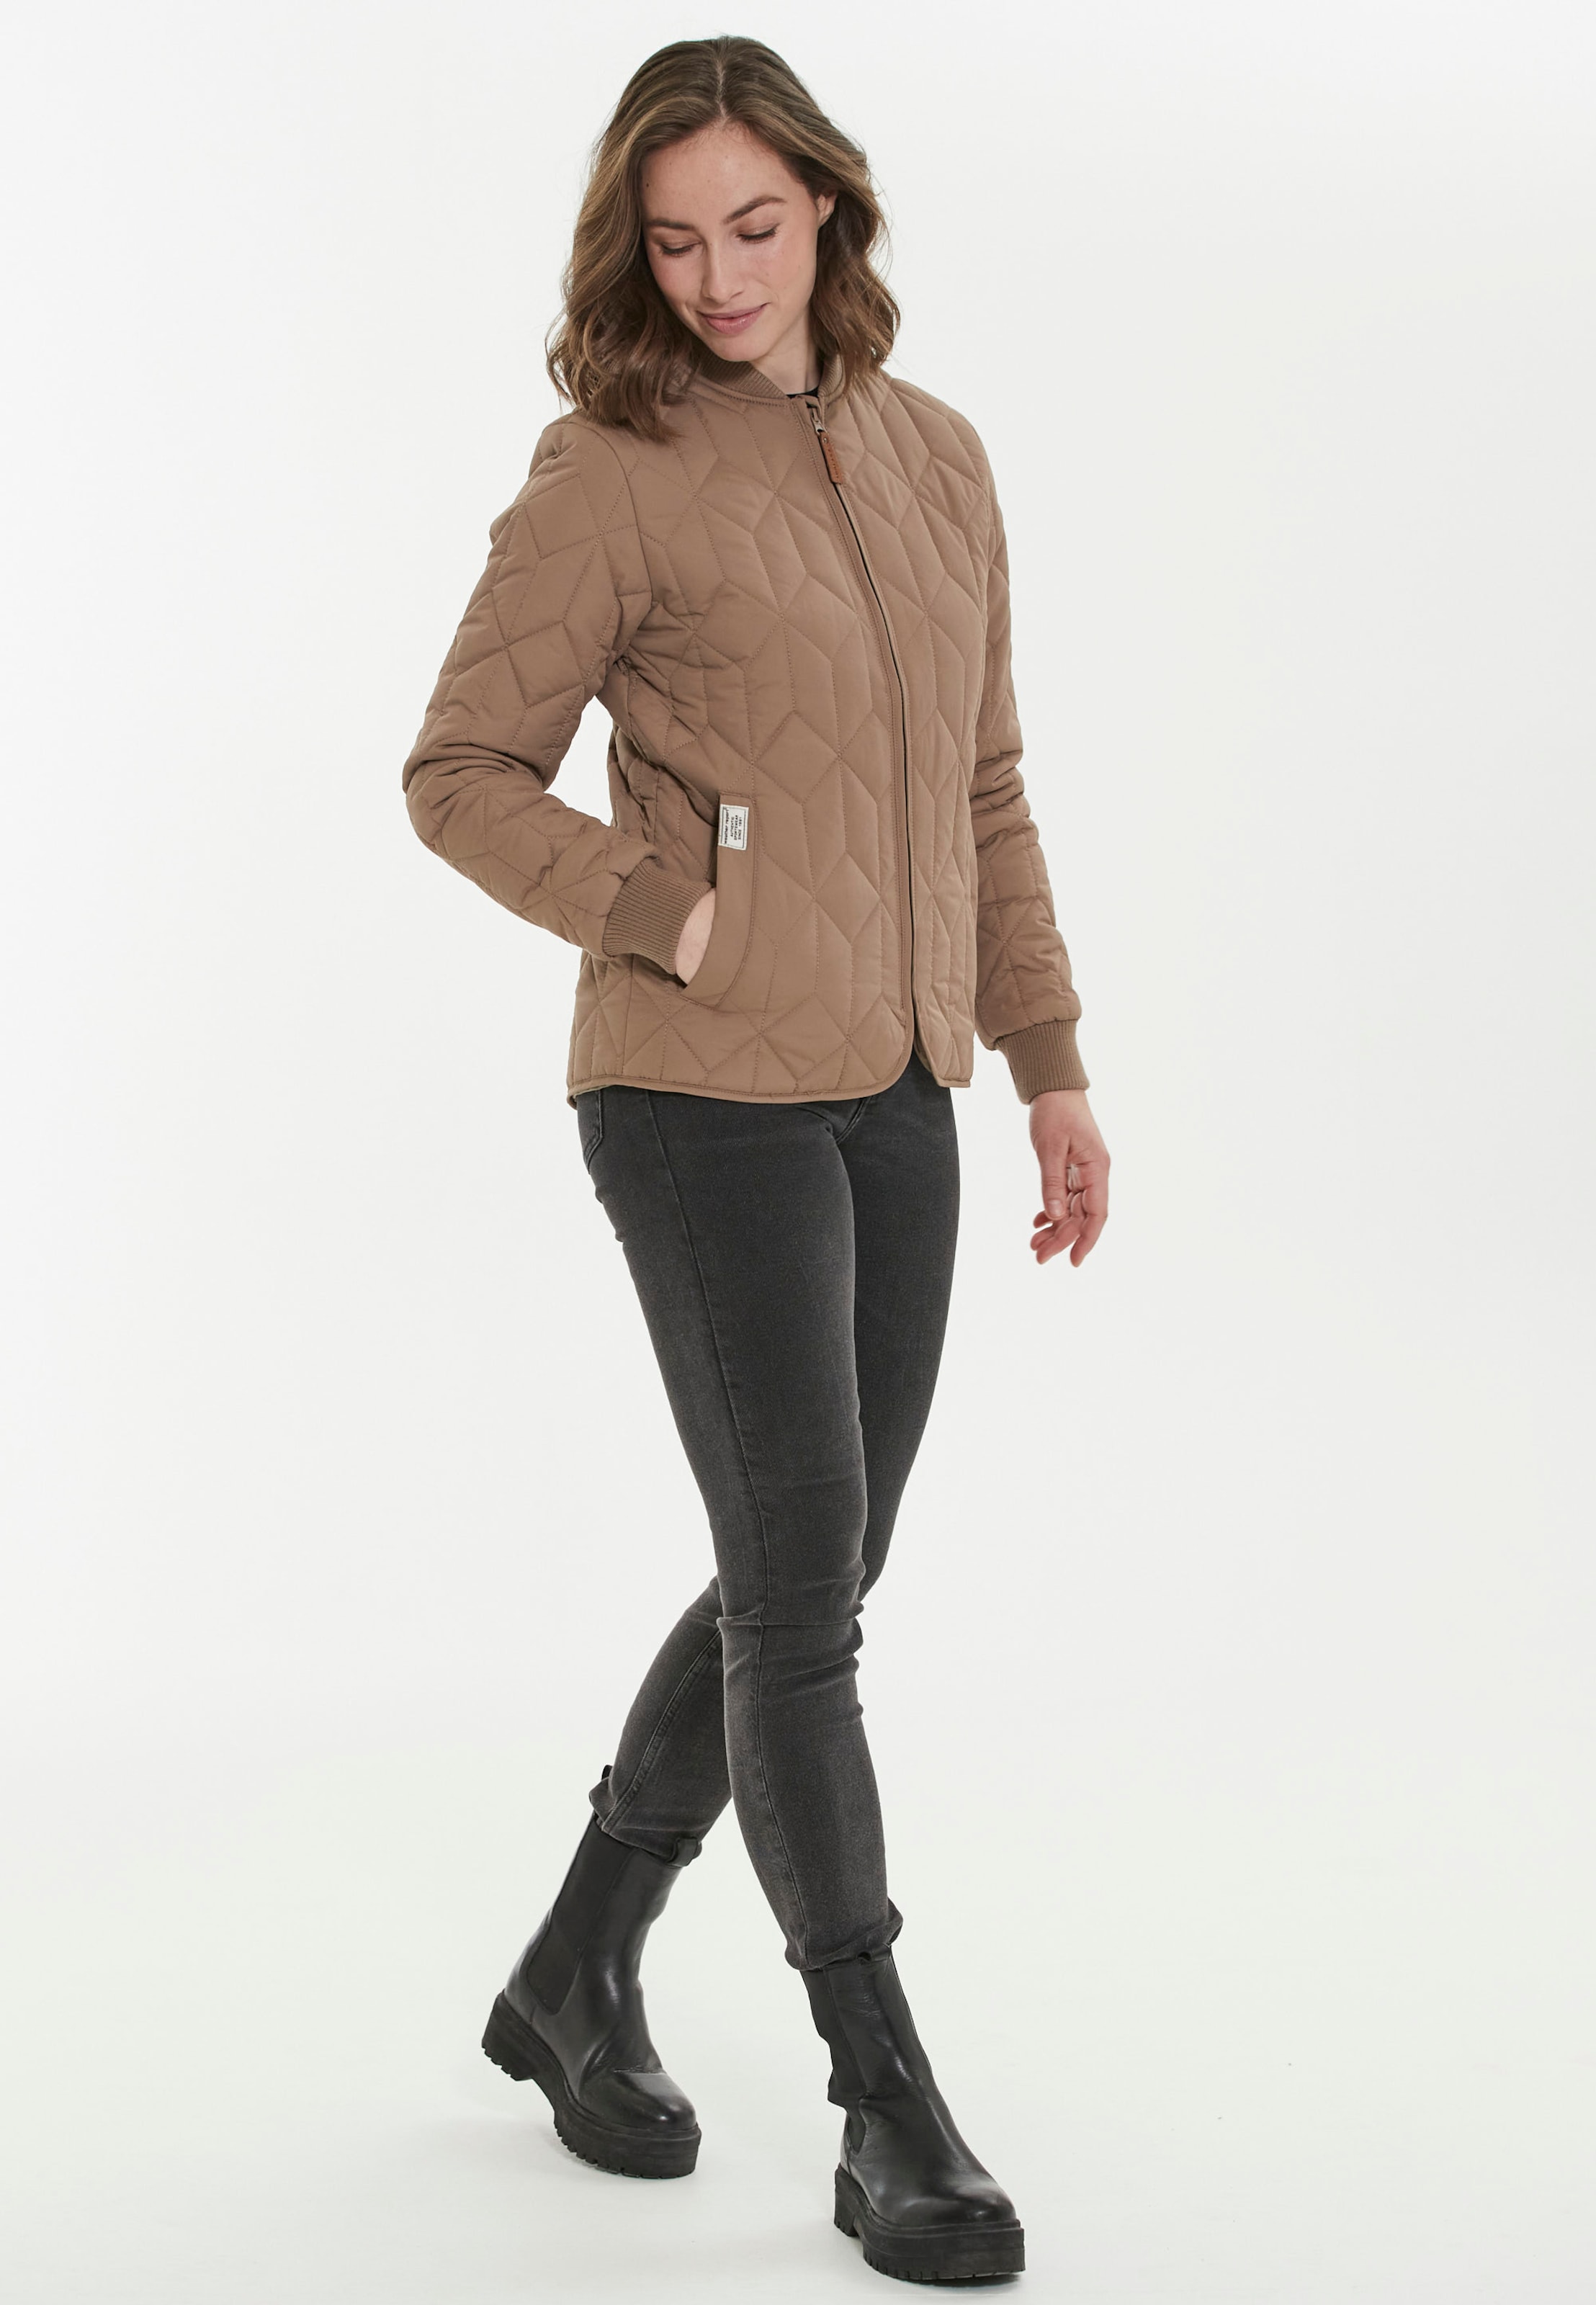 Weather Report Outdoorjacke 'Piper' in Braun | ABOUT YOU